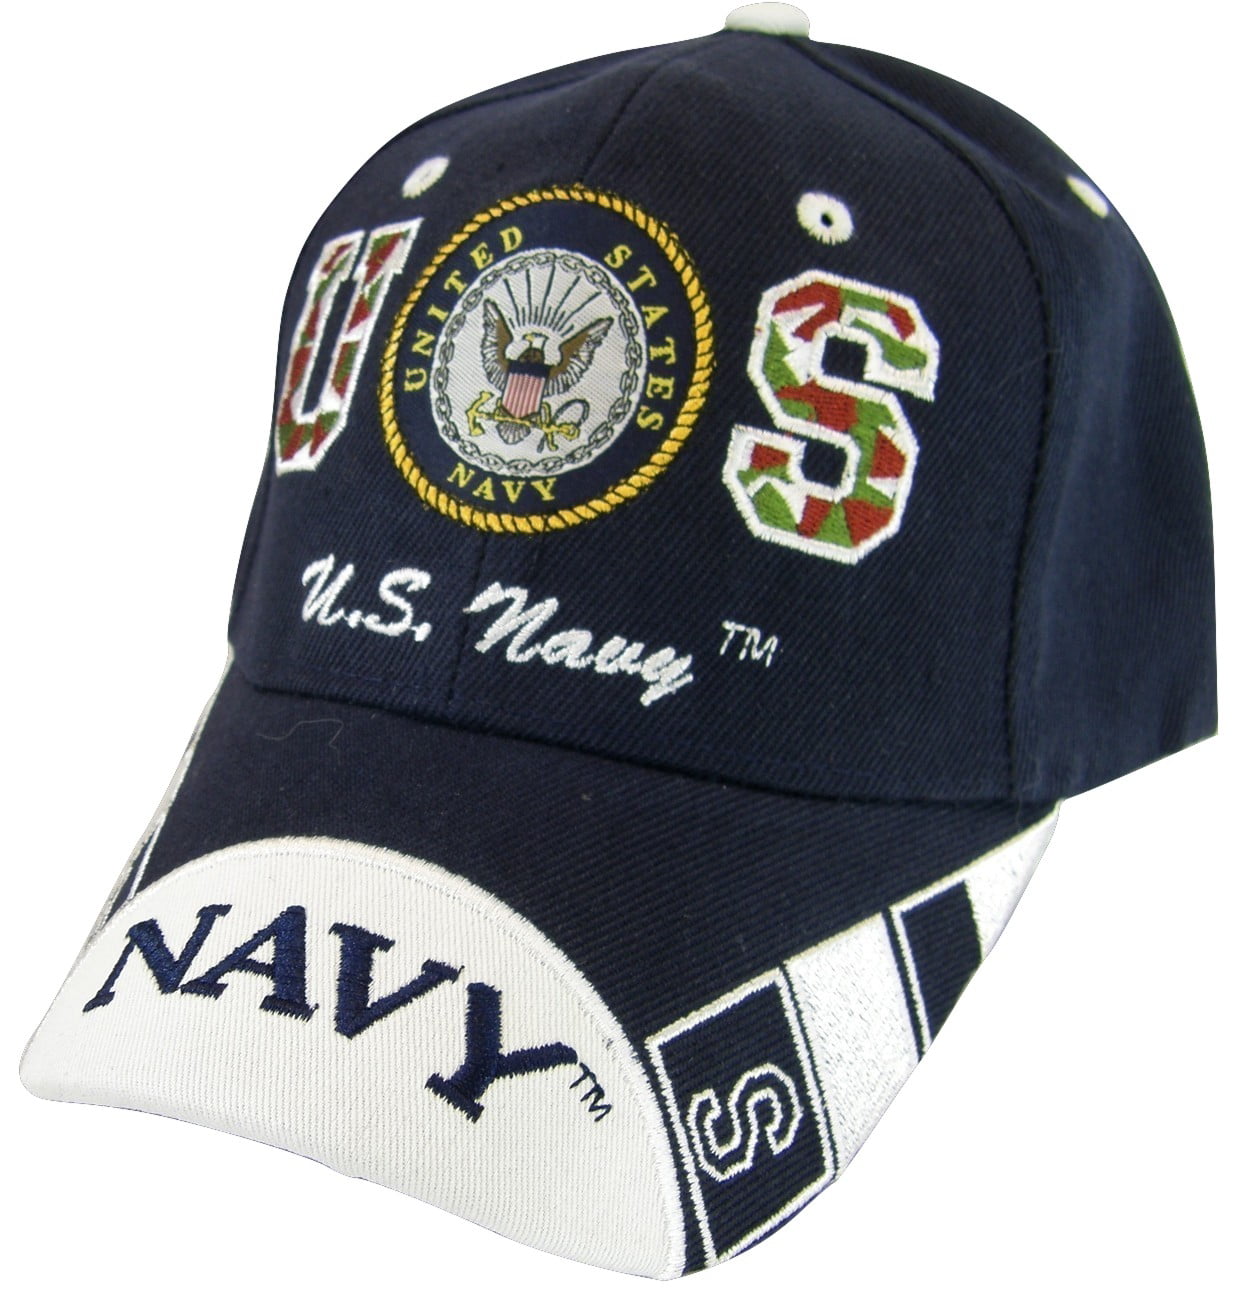 United States Navy Officially Licensed Adjustable Baseball Cap Navy